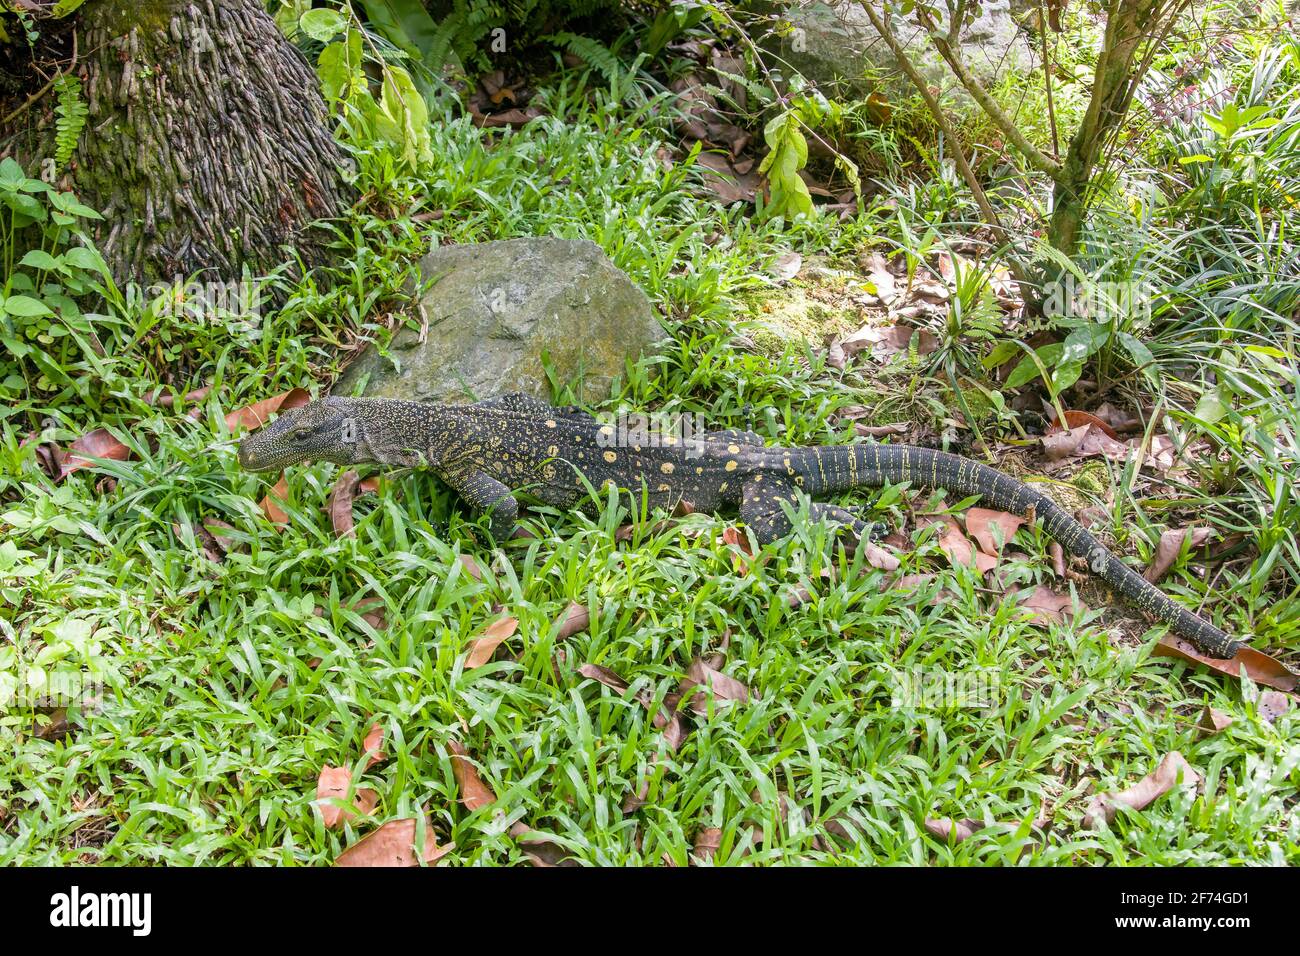 Salvadori's monitor (Varanus salvadorii) is one of the longest lizards in the world It is an arboreal lizard with a dark green body marked with bands Stock Photo